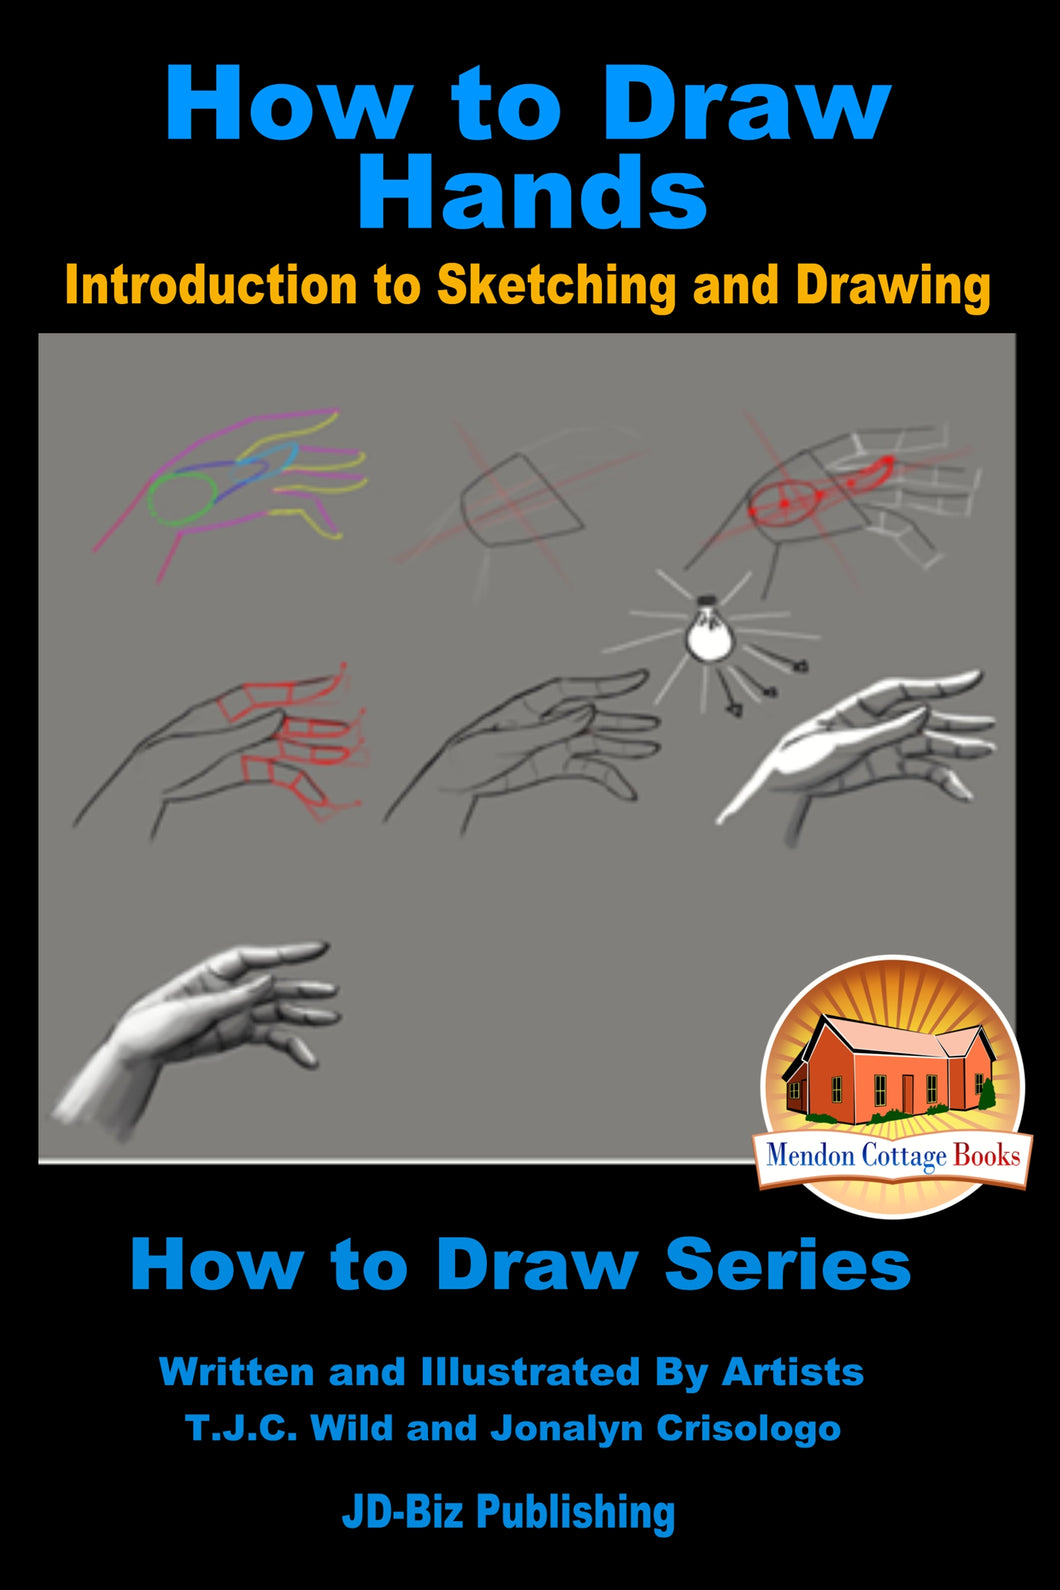 How to Draw Hands and More